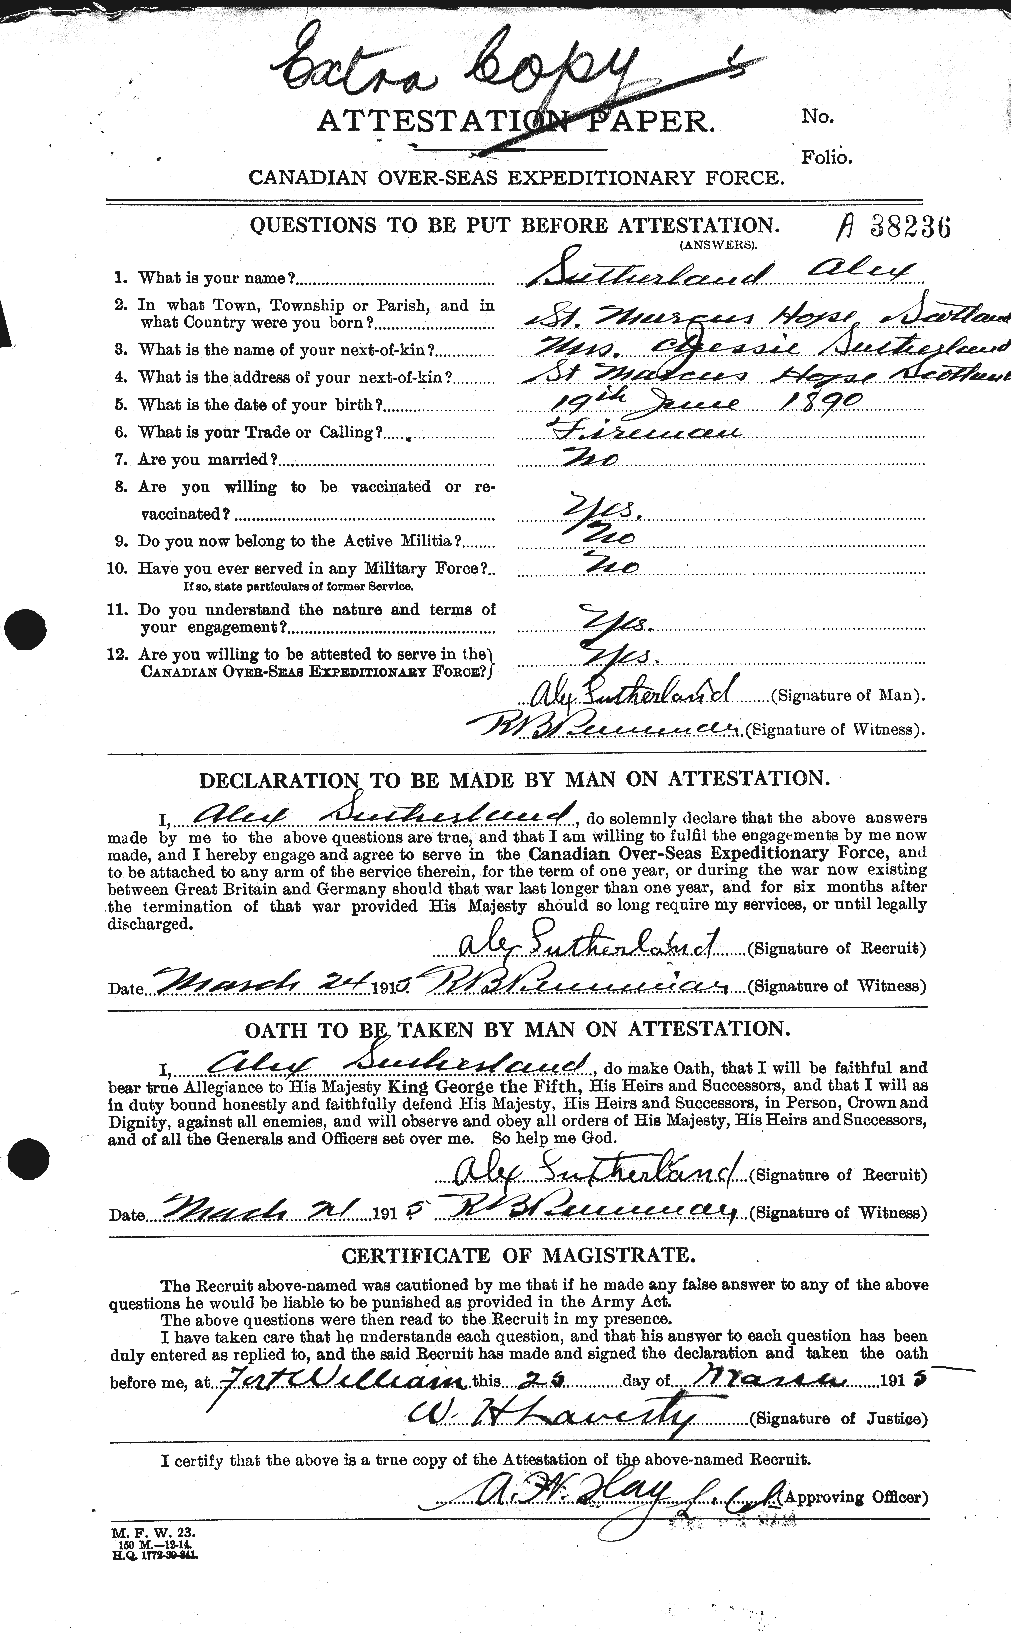 Personnel Records of the First World War - CEF 125379a